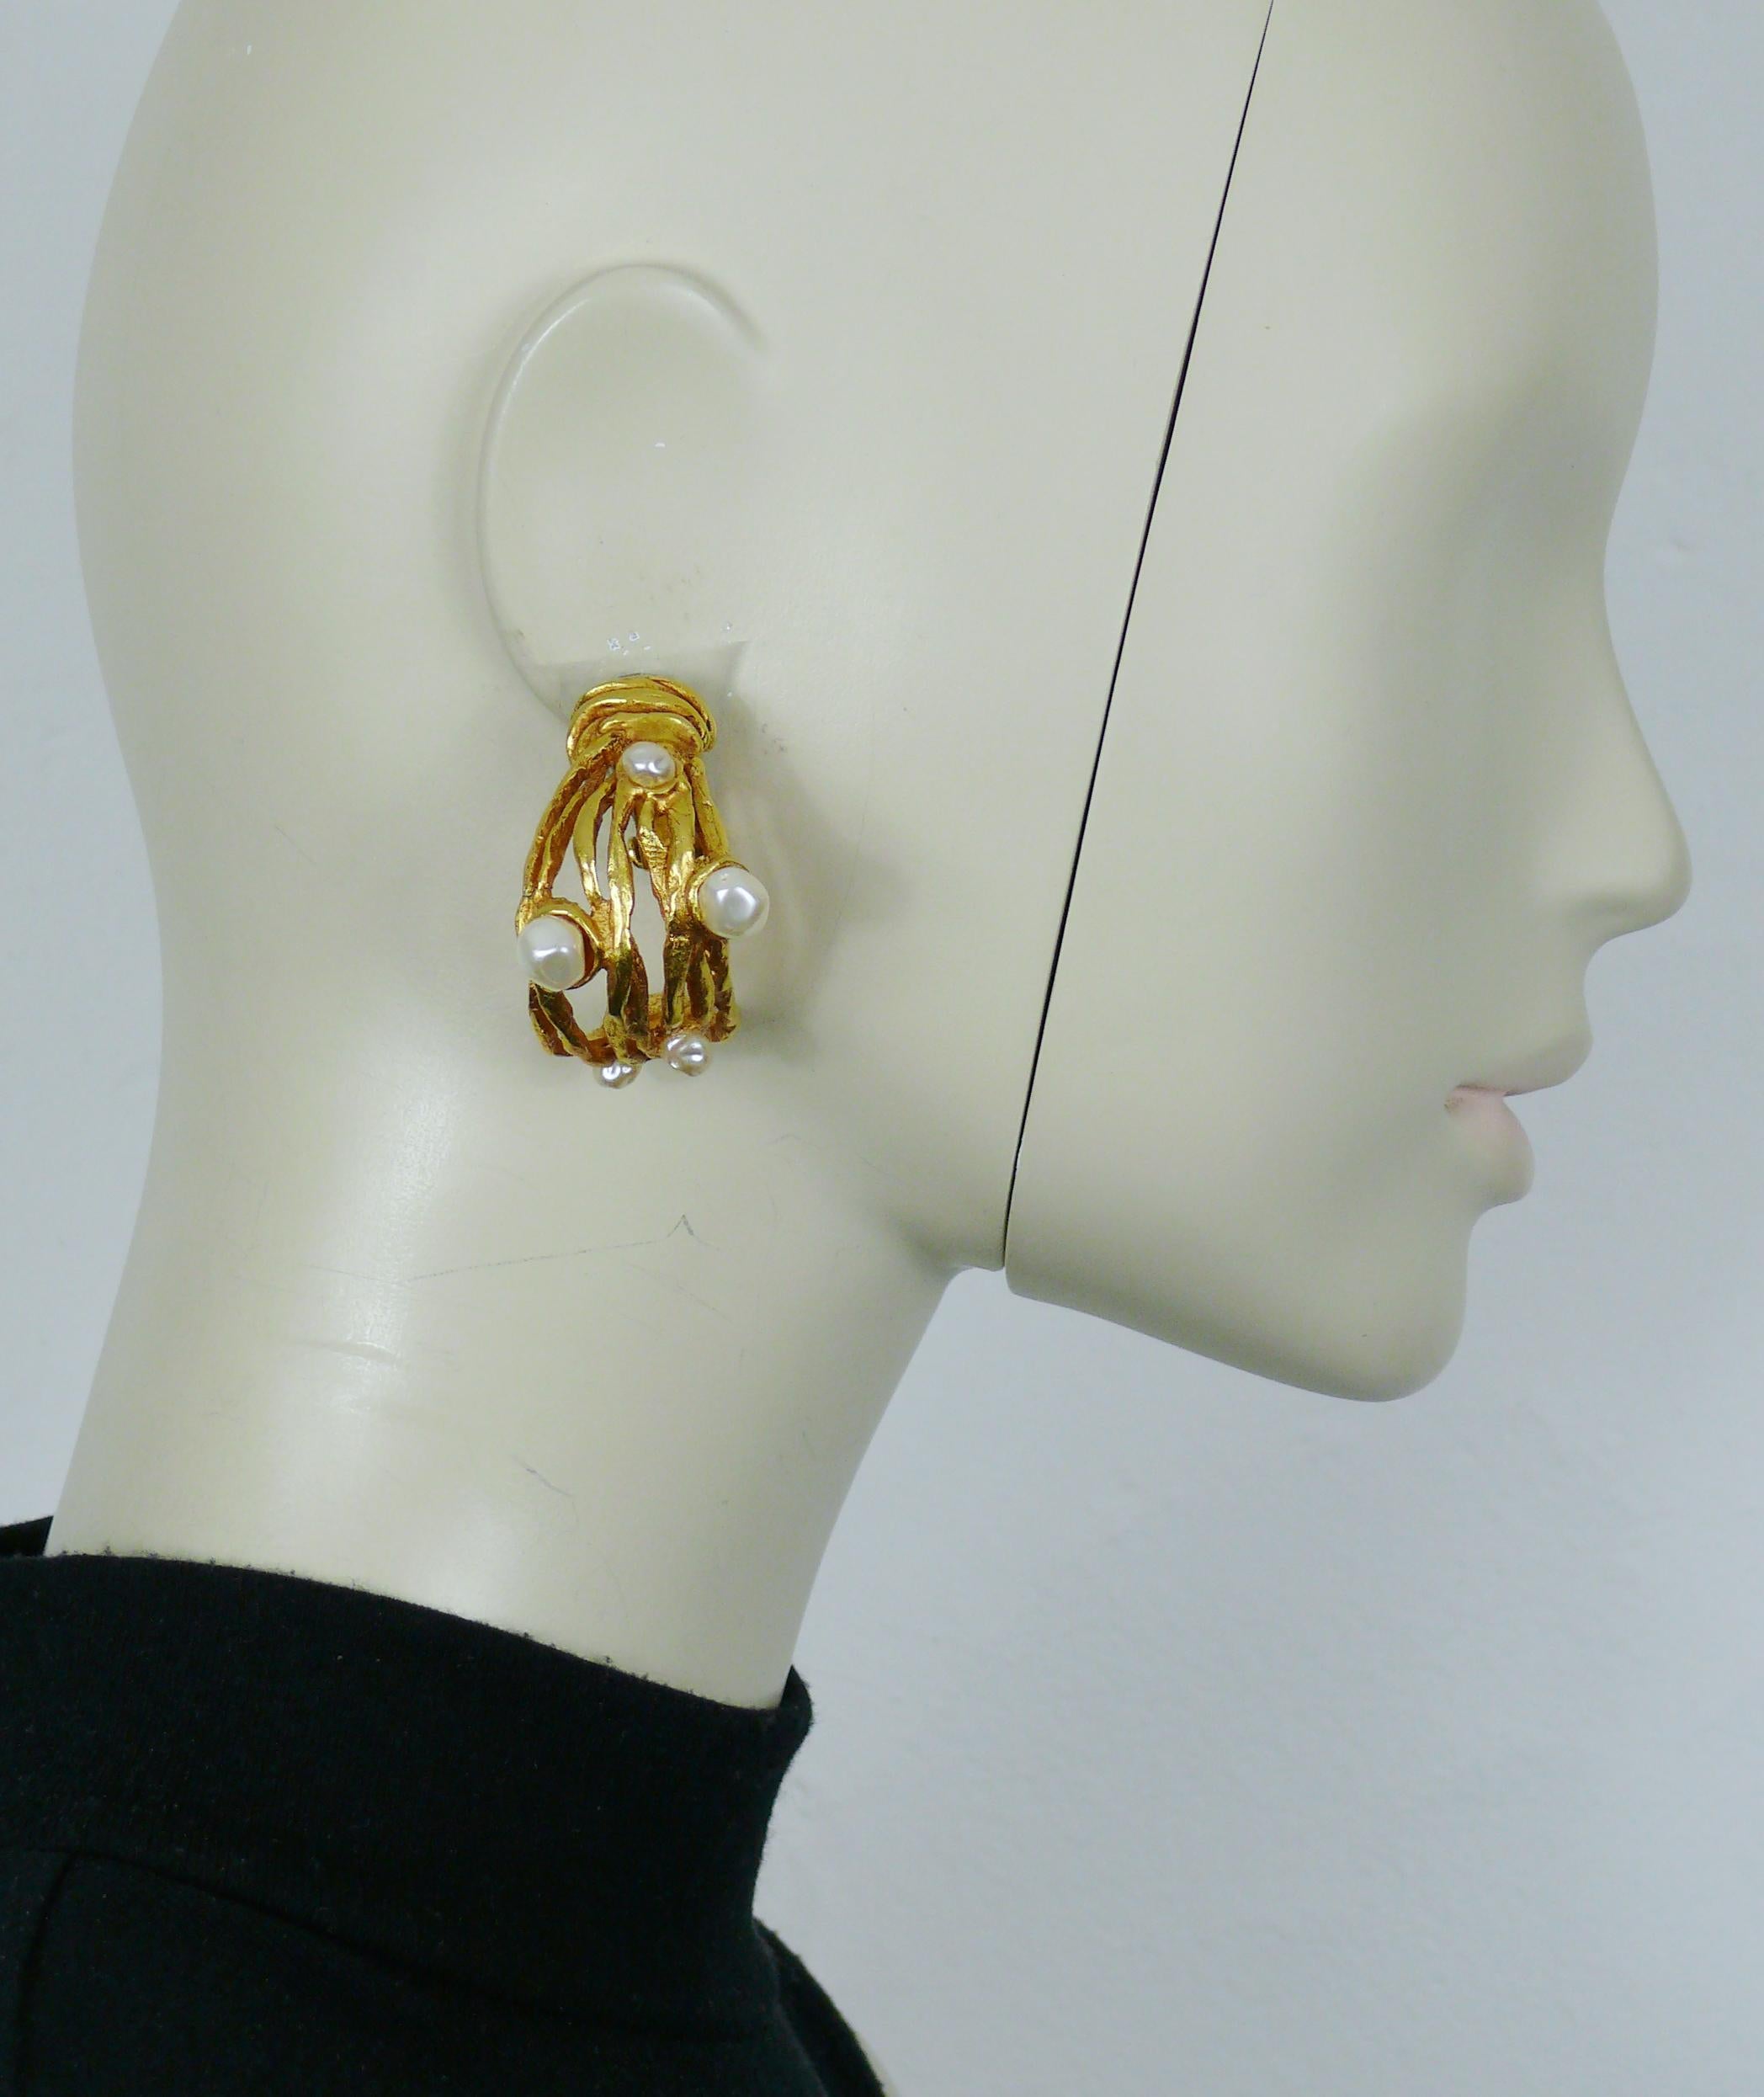 CHRISTIAN LACROIX vintage gold tone openwork half hoop earrings (clip-on) embellished with faux pearls.

Marked CHRISTIAN LACROIX CL Made in France.

Indicative measurements : max. height approx. 4.5 cm (1.77 inches) / max. width approx. 2.5 cm